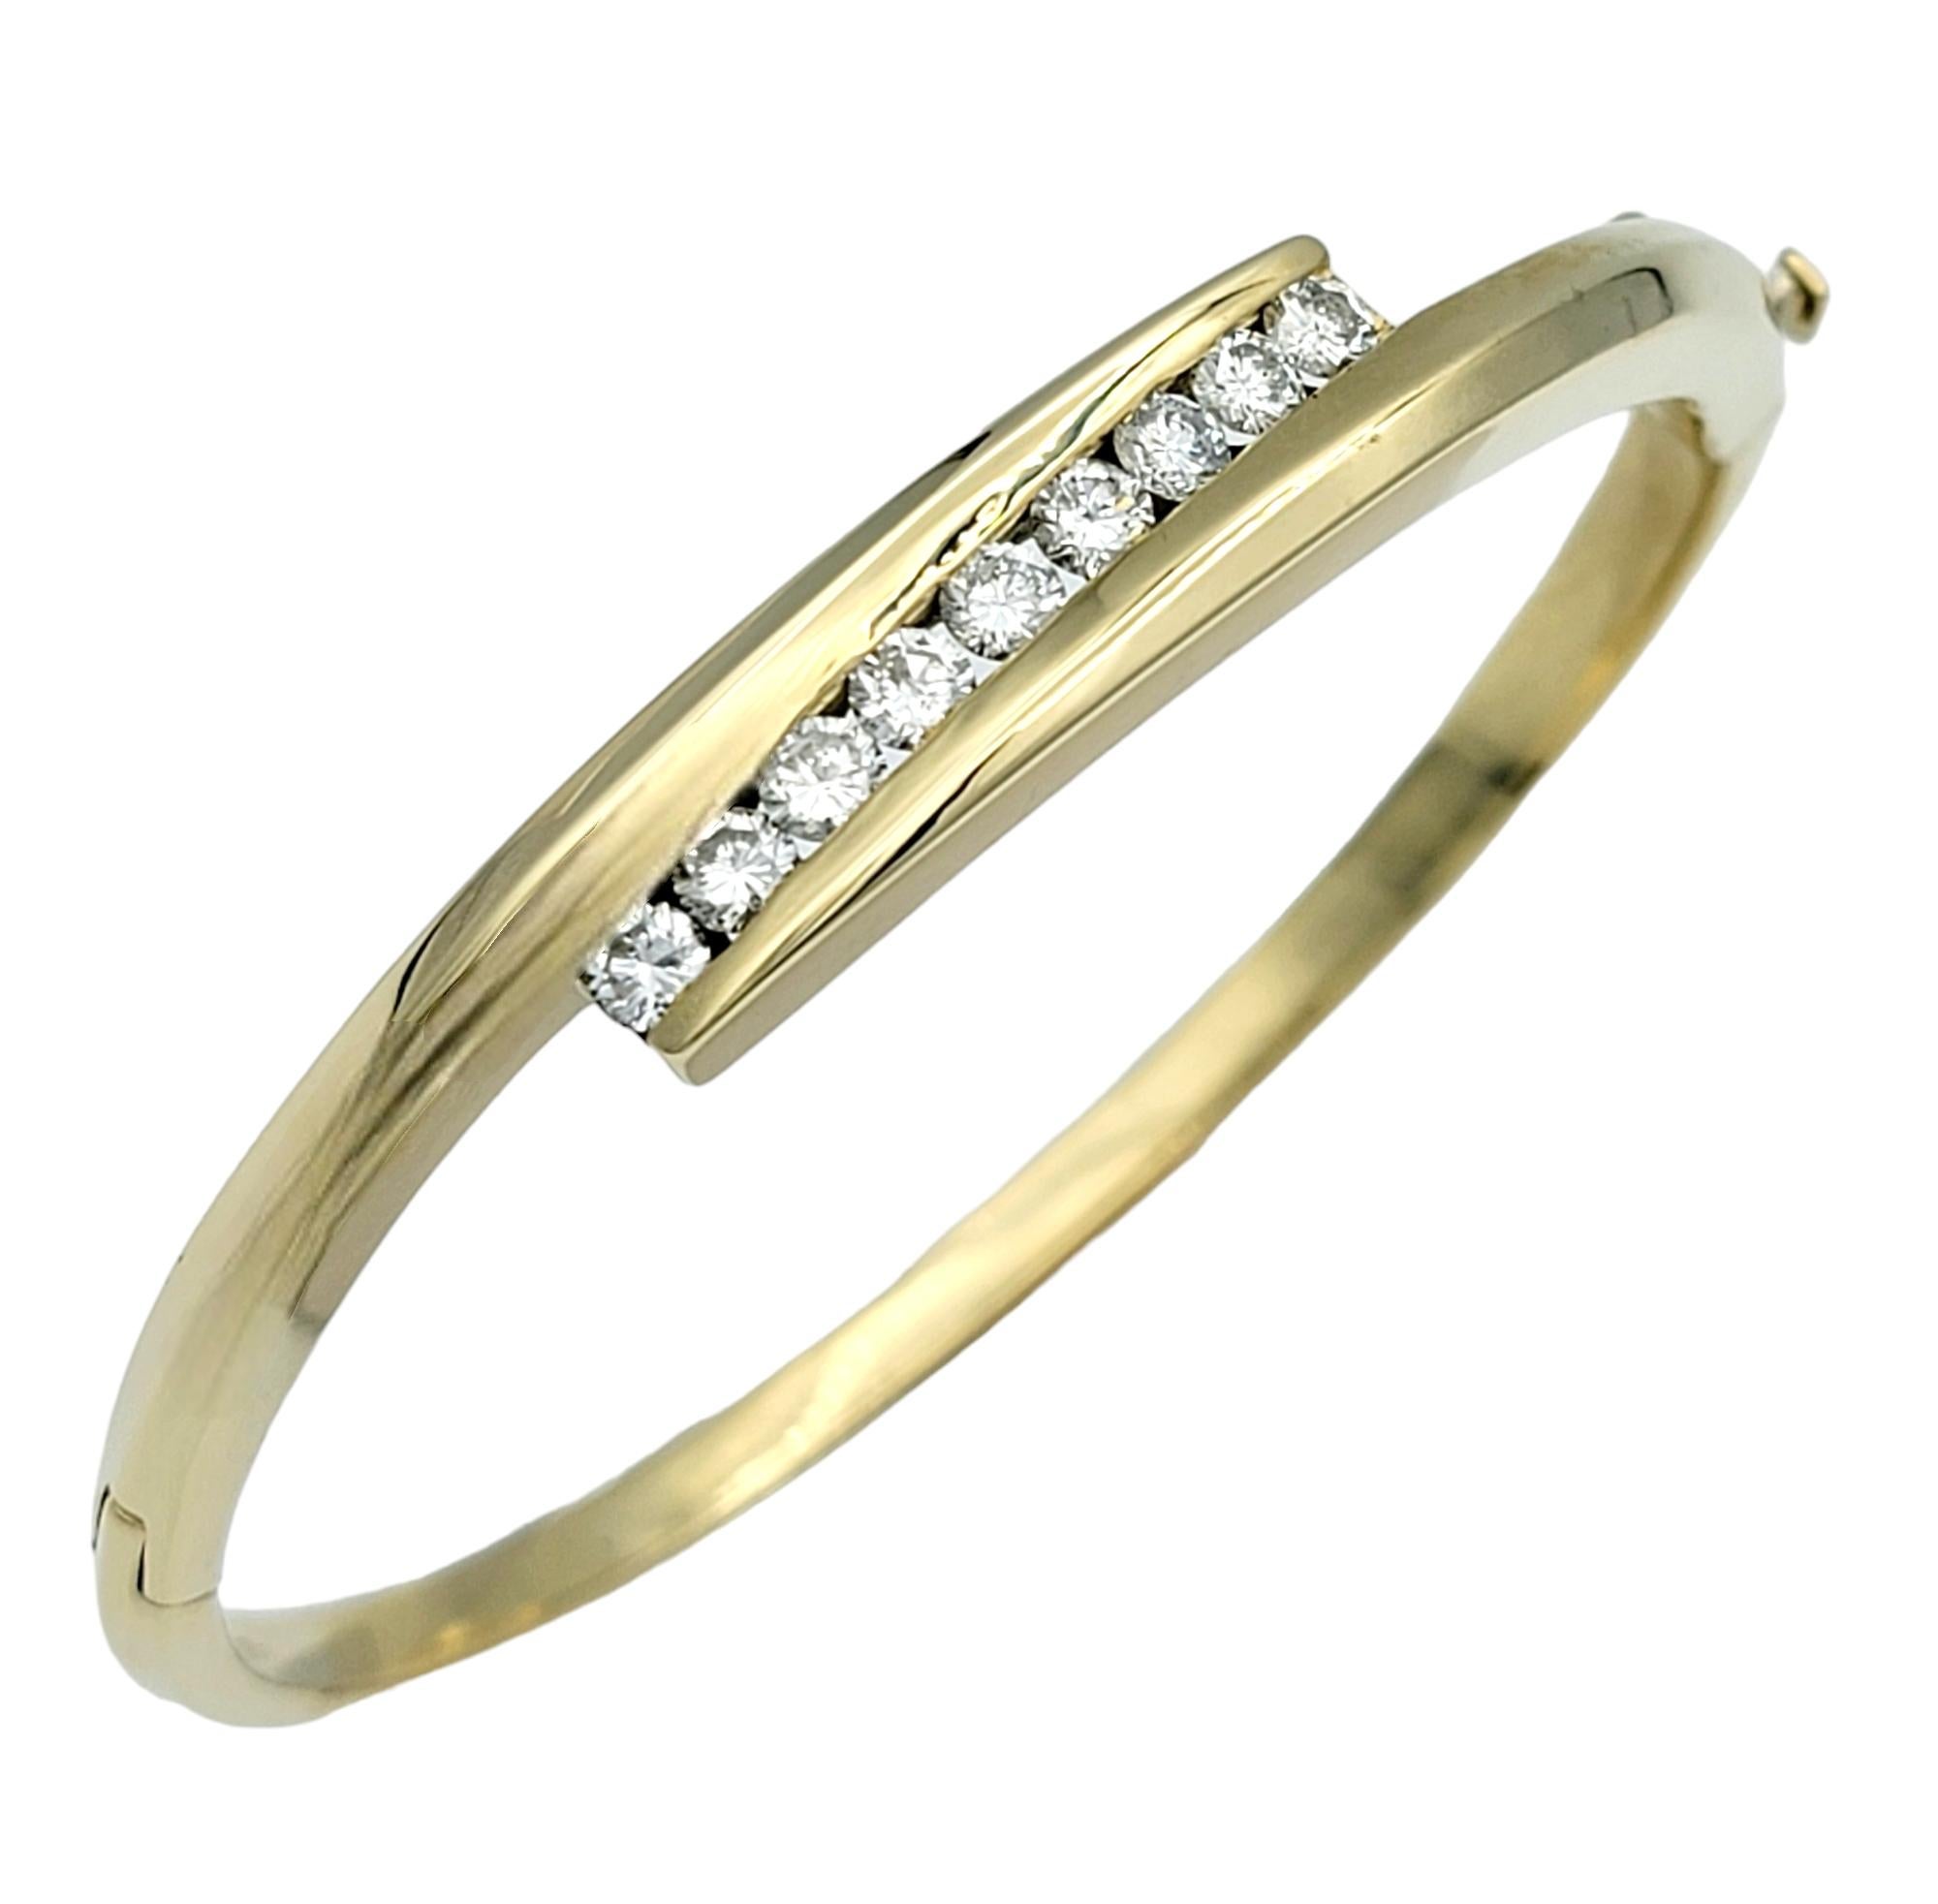 The inner circumference of this bracelet measures 6.75 inches and will comfortably fit up to a 6.5 inch wrist. 

This diamond bypass-style hinged bangle bracelet is a sophisticated accessory crafted in 14 karat yellow gold. The bypass design gives